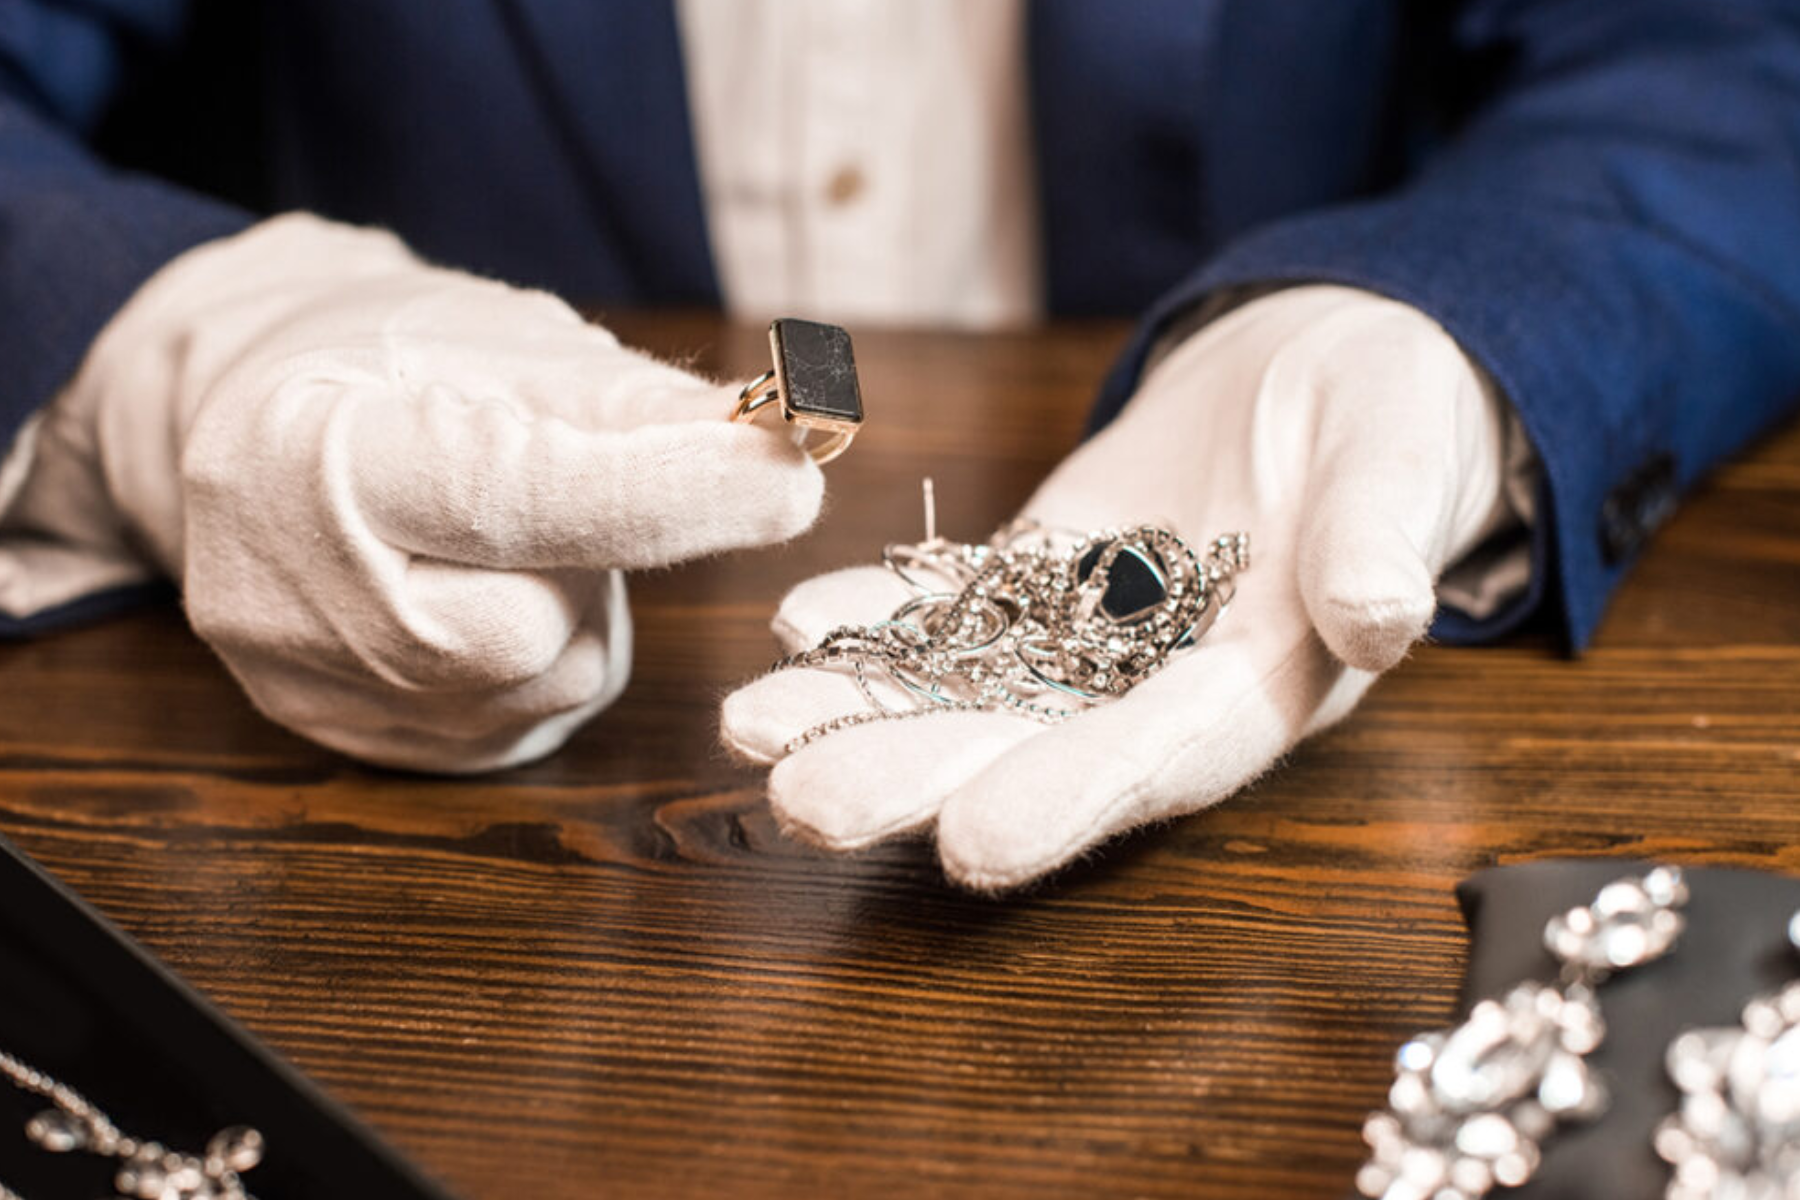 An expert with a collection of vintage jewelry